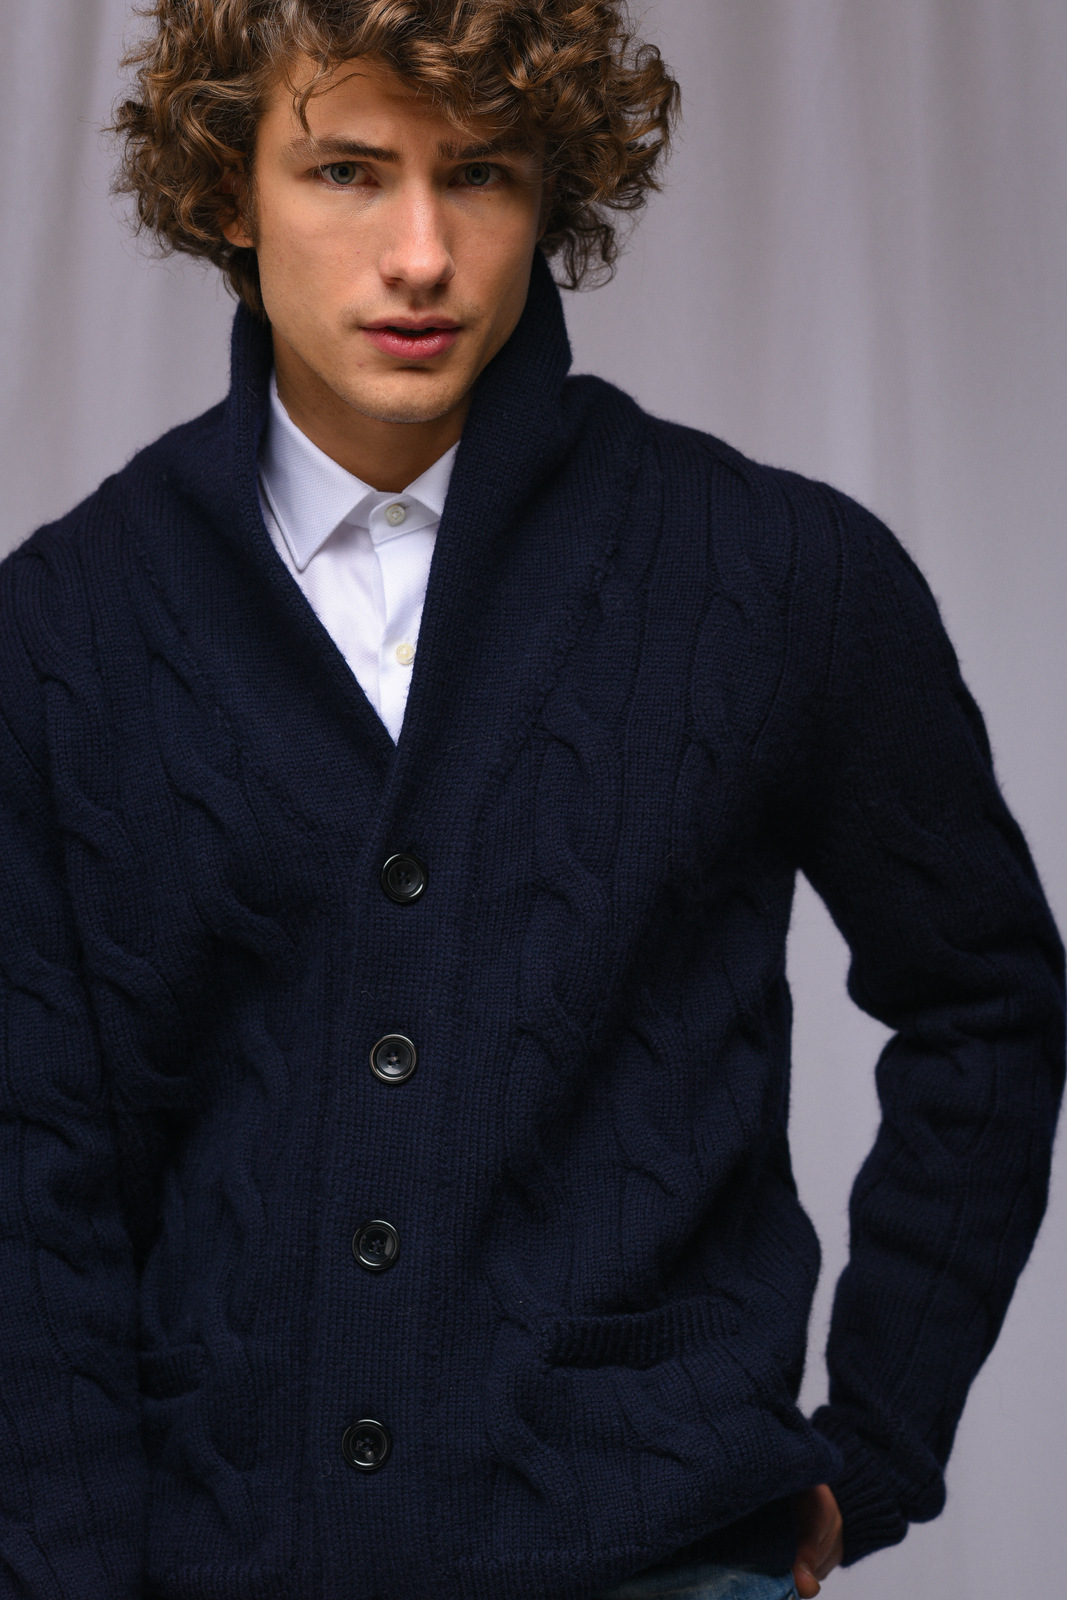 https://amiamalia.com/wp-content/uploads/2019/11/Cable-Knit-Cardigan-for-men-Navy-4.jpg